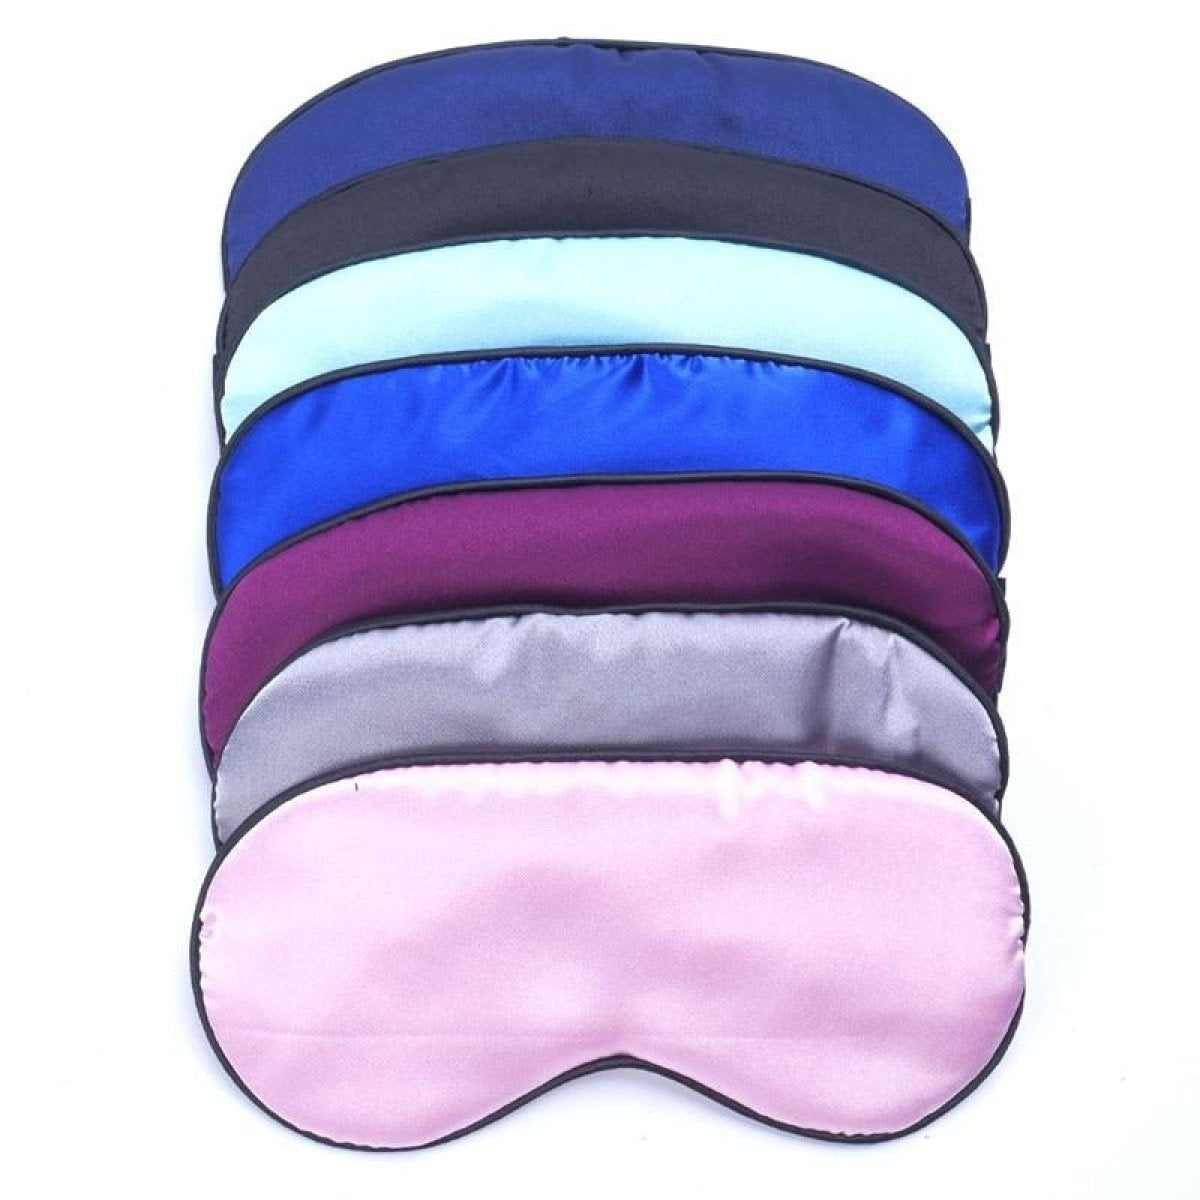 Silk Sleep Rest Eye Mask Padded Shade Cover Travel Relax Aid | Asia Sell | Black